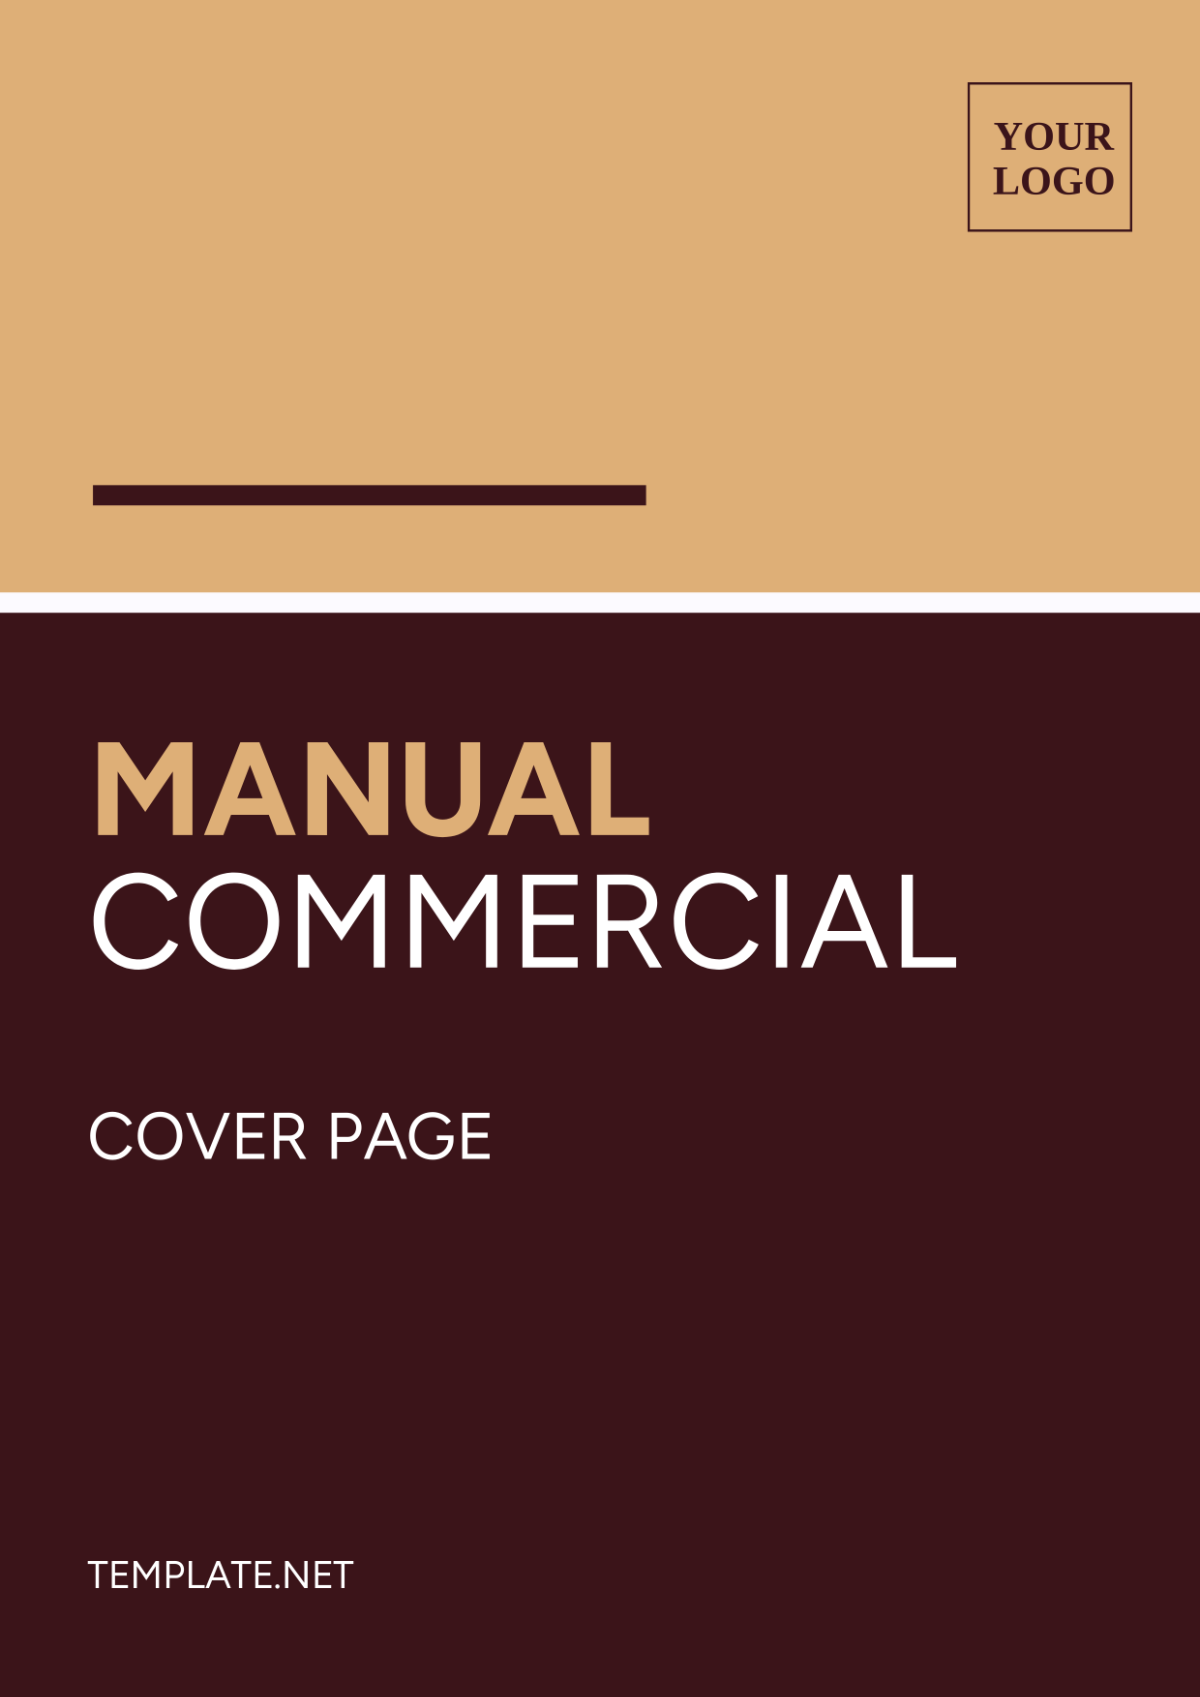 Manual Commercial Cover Page Template